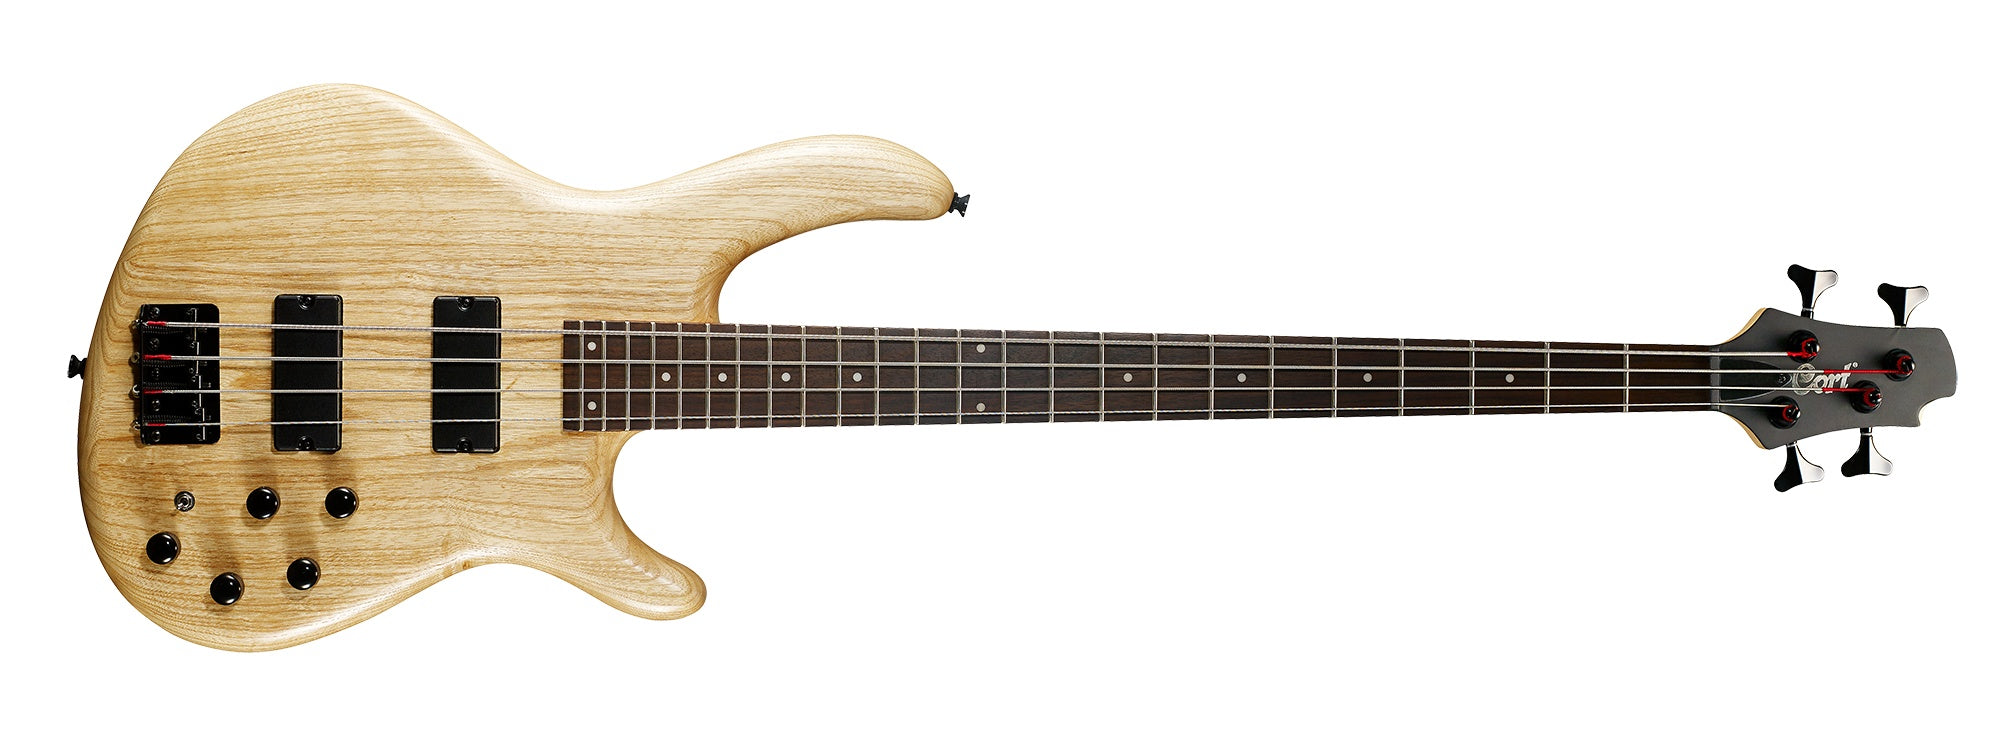 Cort Action Bass Deluxe AS Open Pore Natural-Richards Guitars Of Stratford Upon Avon